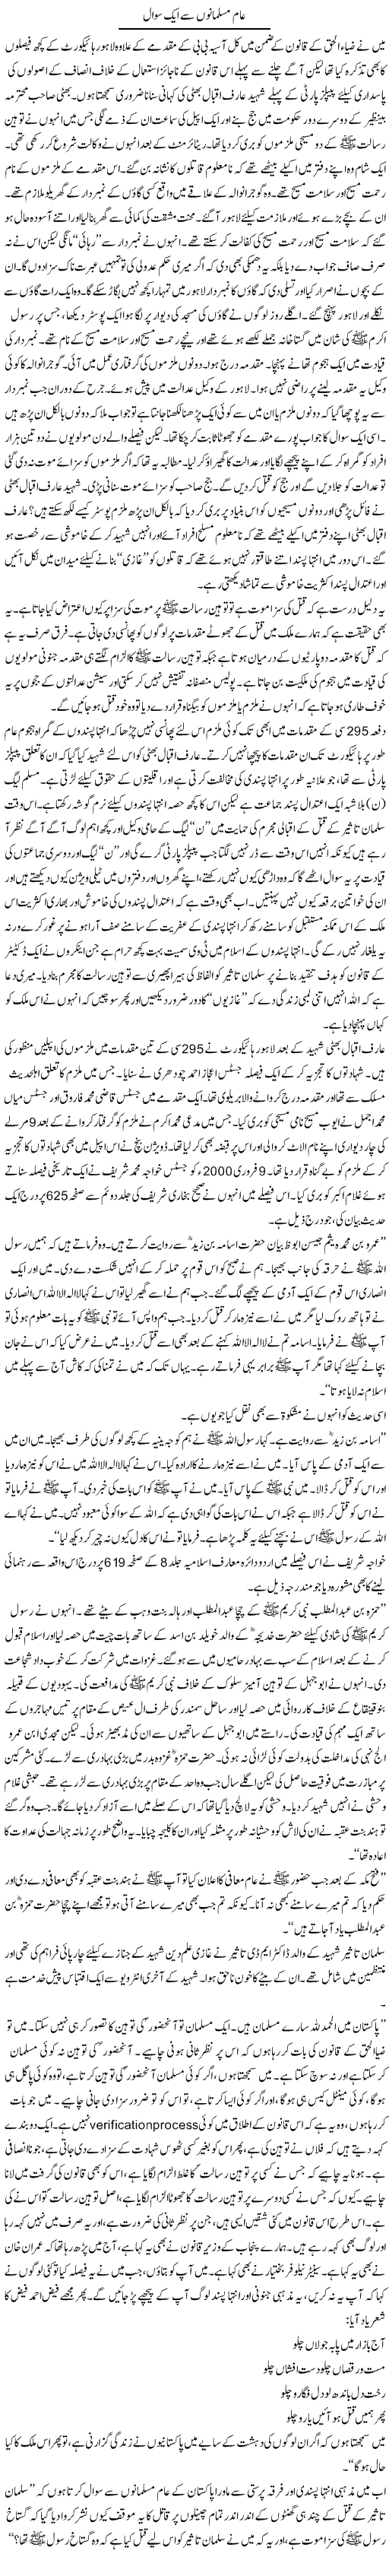 Question To Muslims Express Column Abbas Athar 7 January 2011